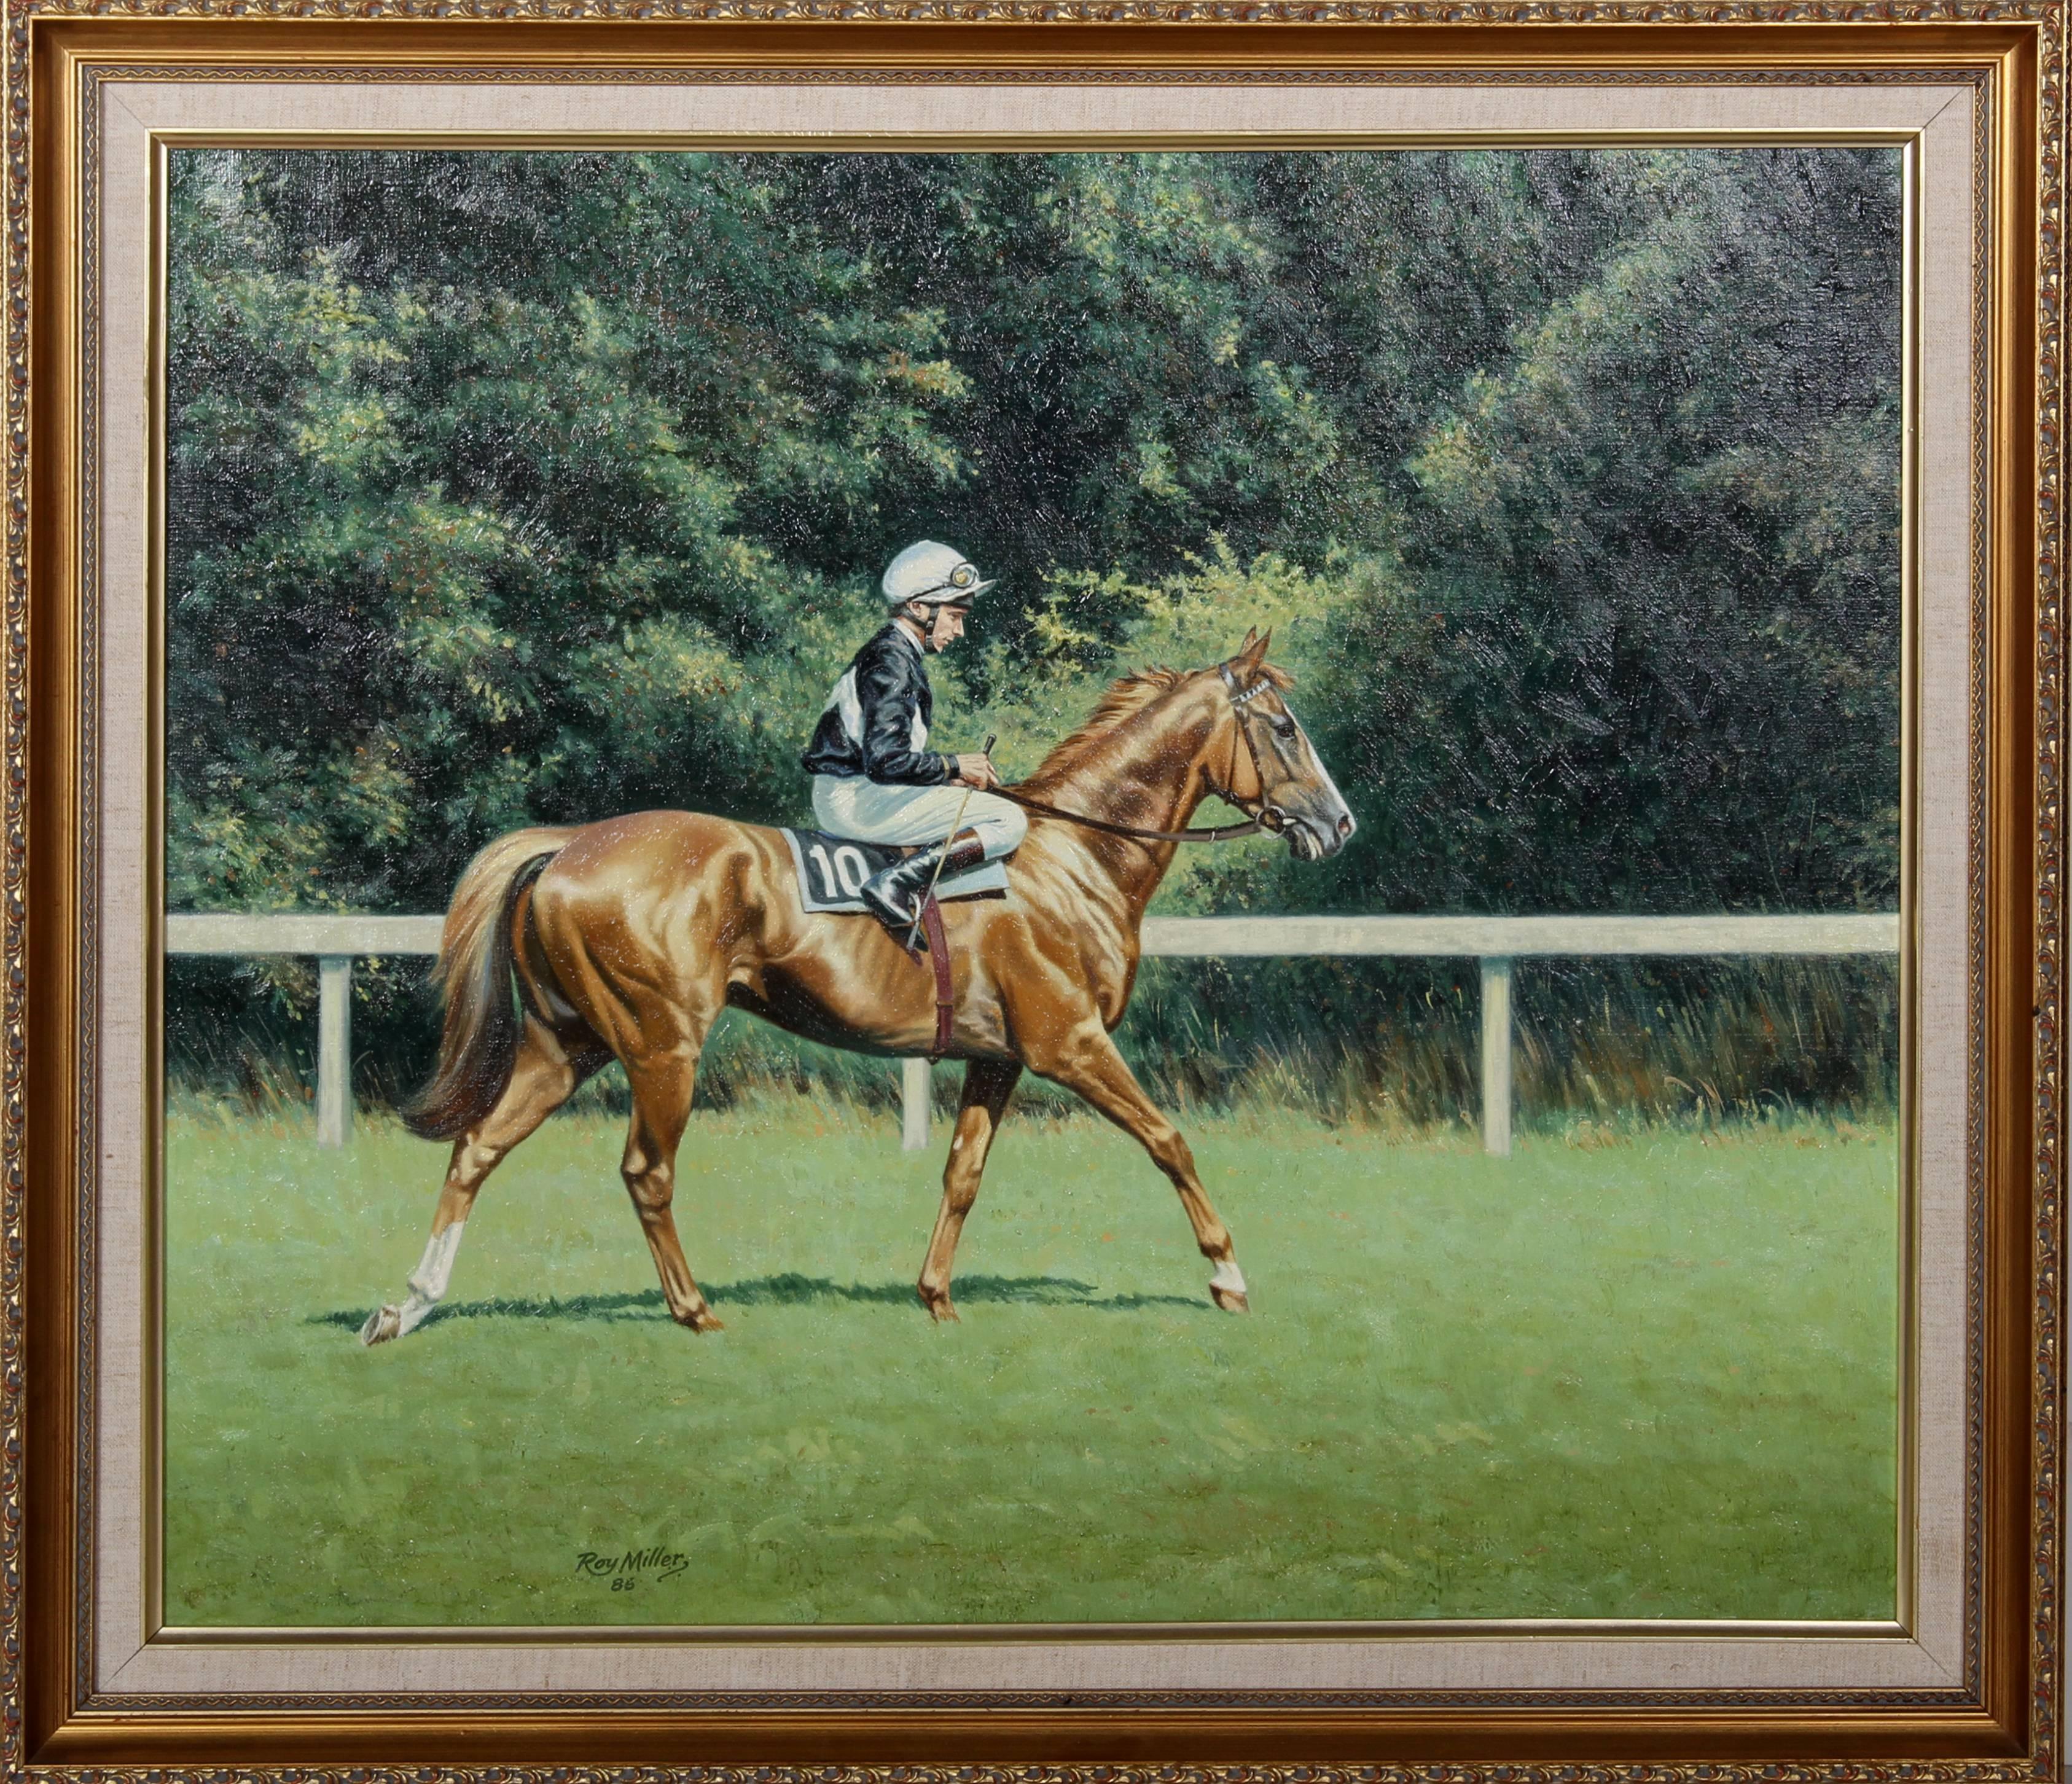 Lanfranco - Steve Cauthen up, Oil Painting by Roy Miller